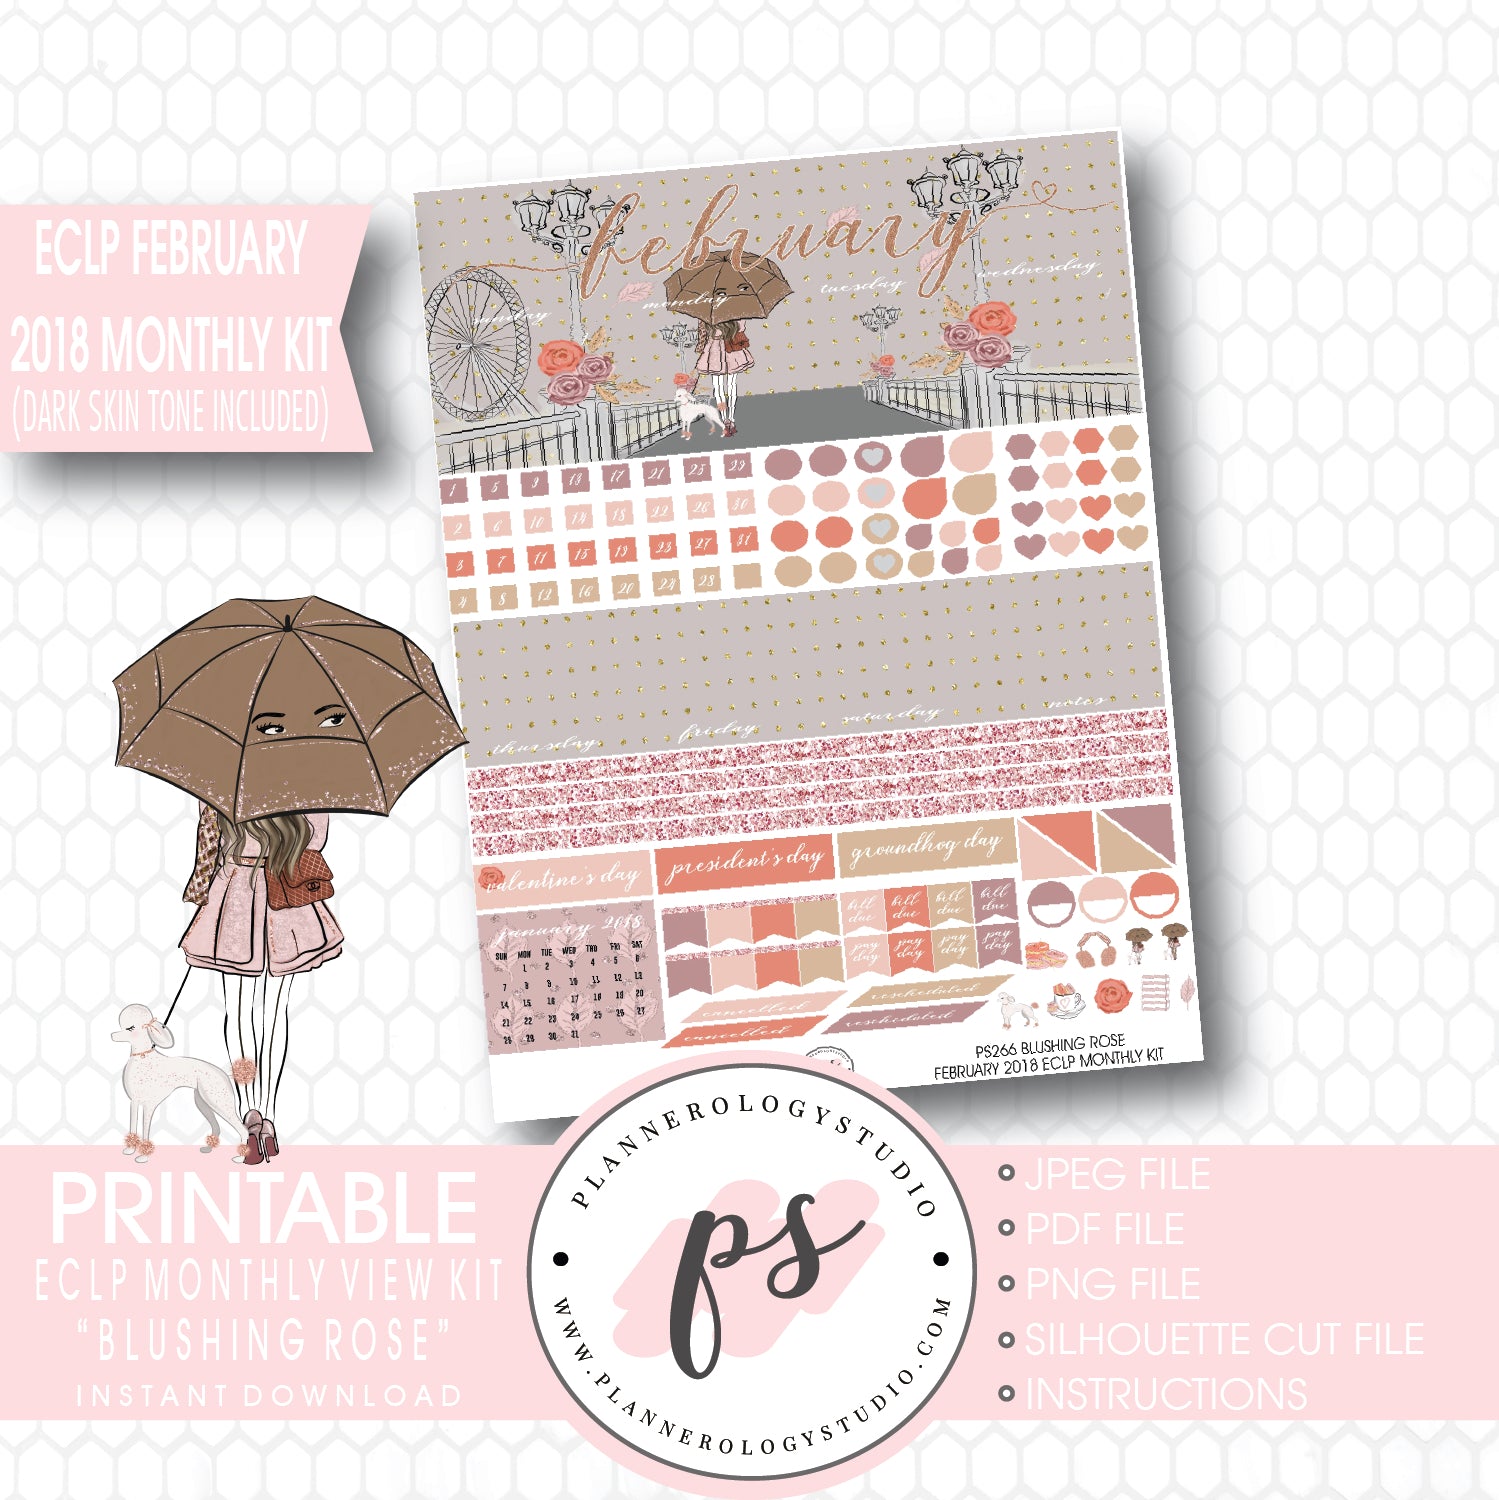 Blushing Rose February 2018 Monthly View Kit Printable Planner Stickers (Dark & Light Skintone) (for use with ECLP) - Plannerologystudio